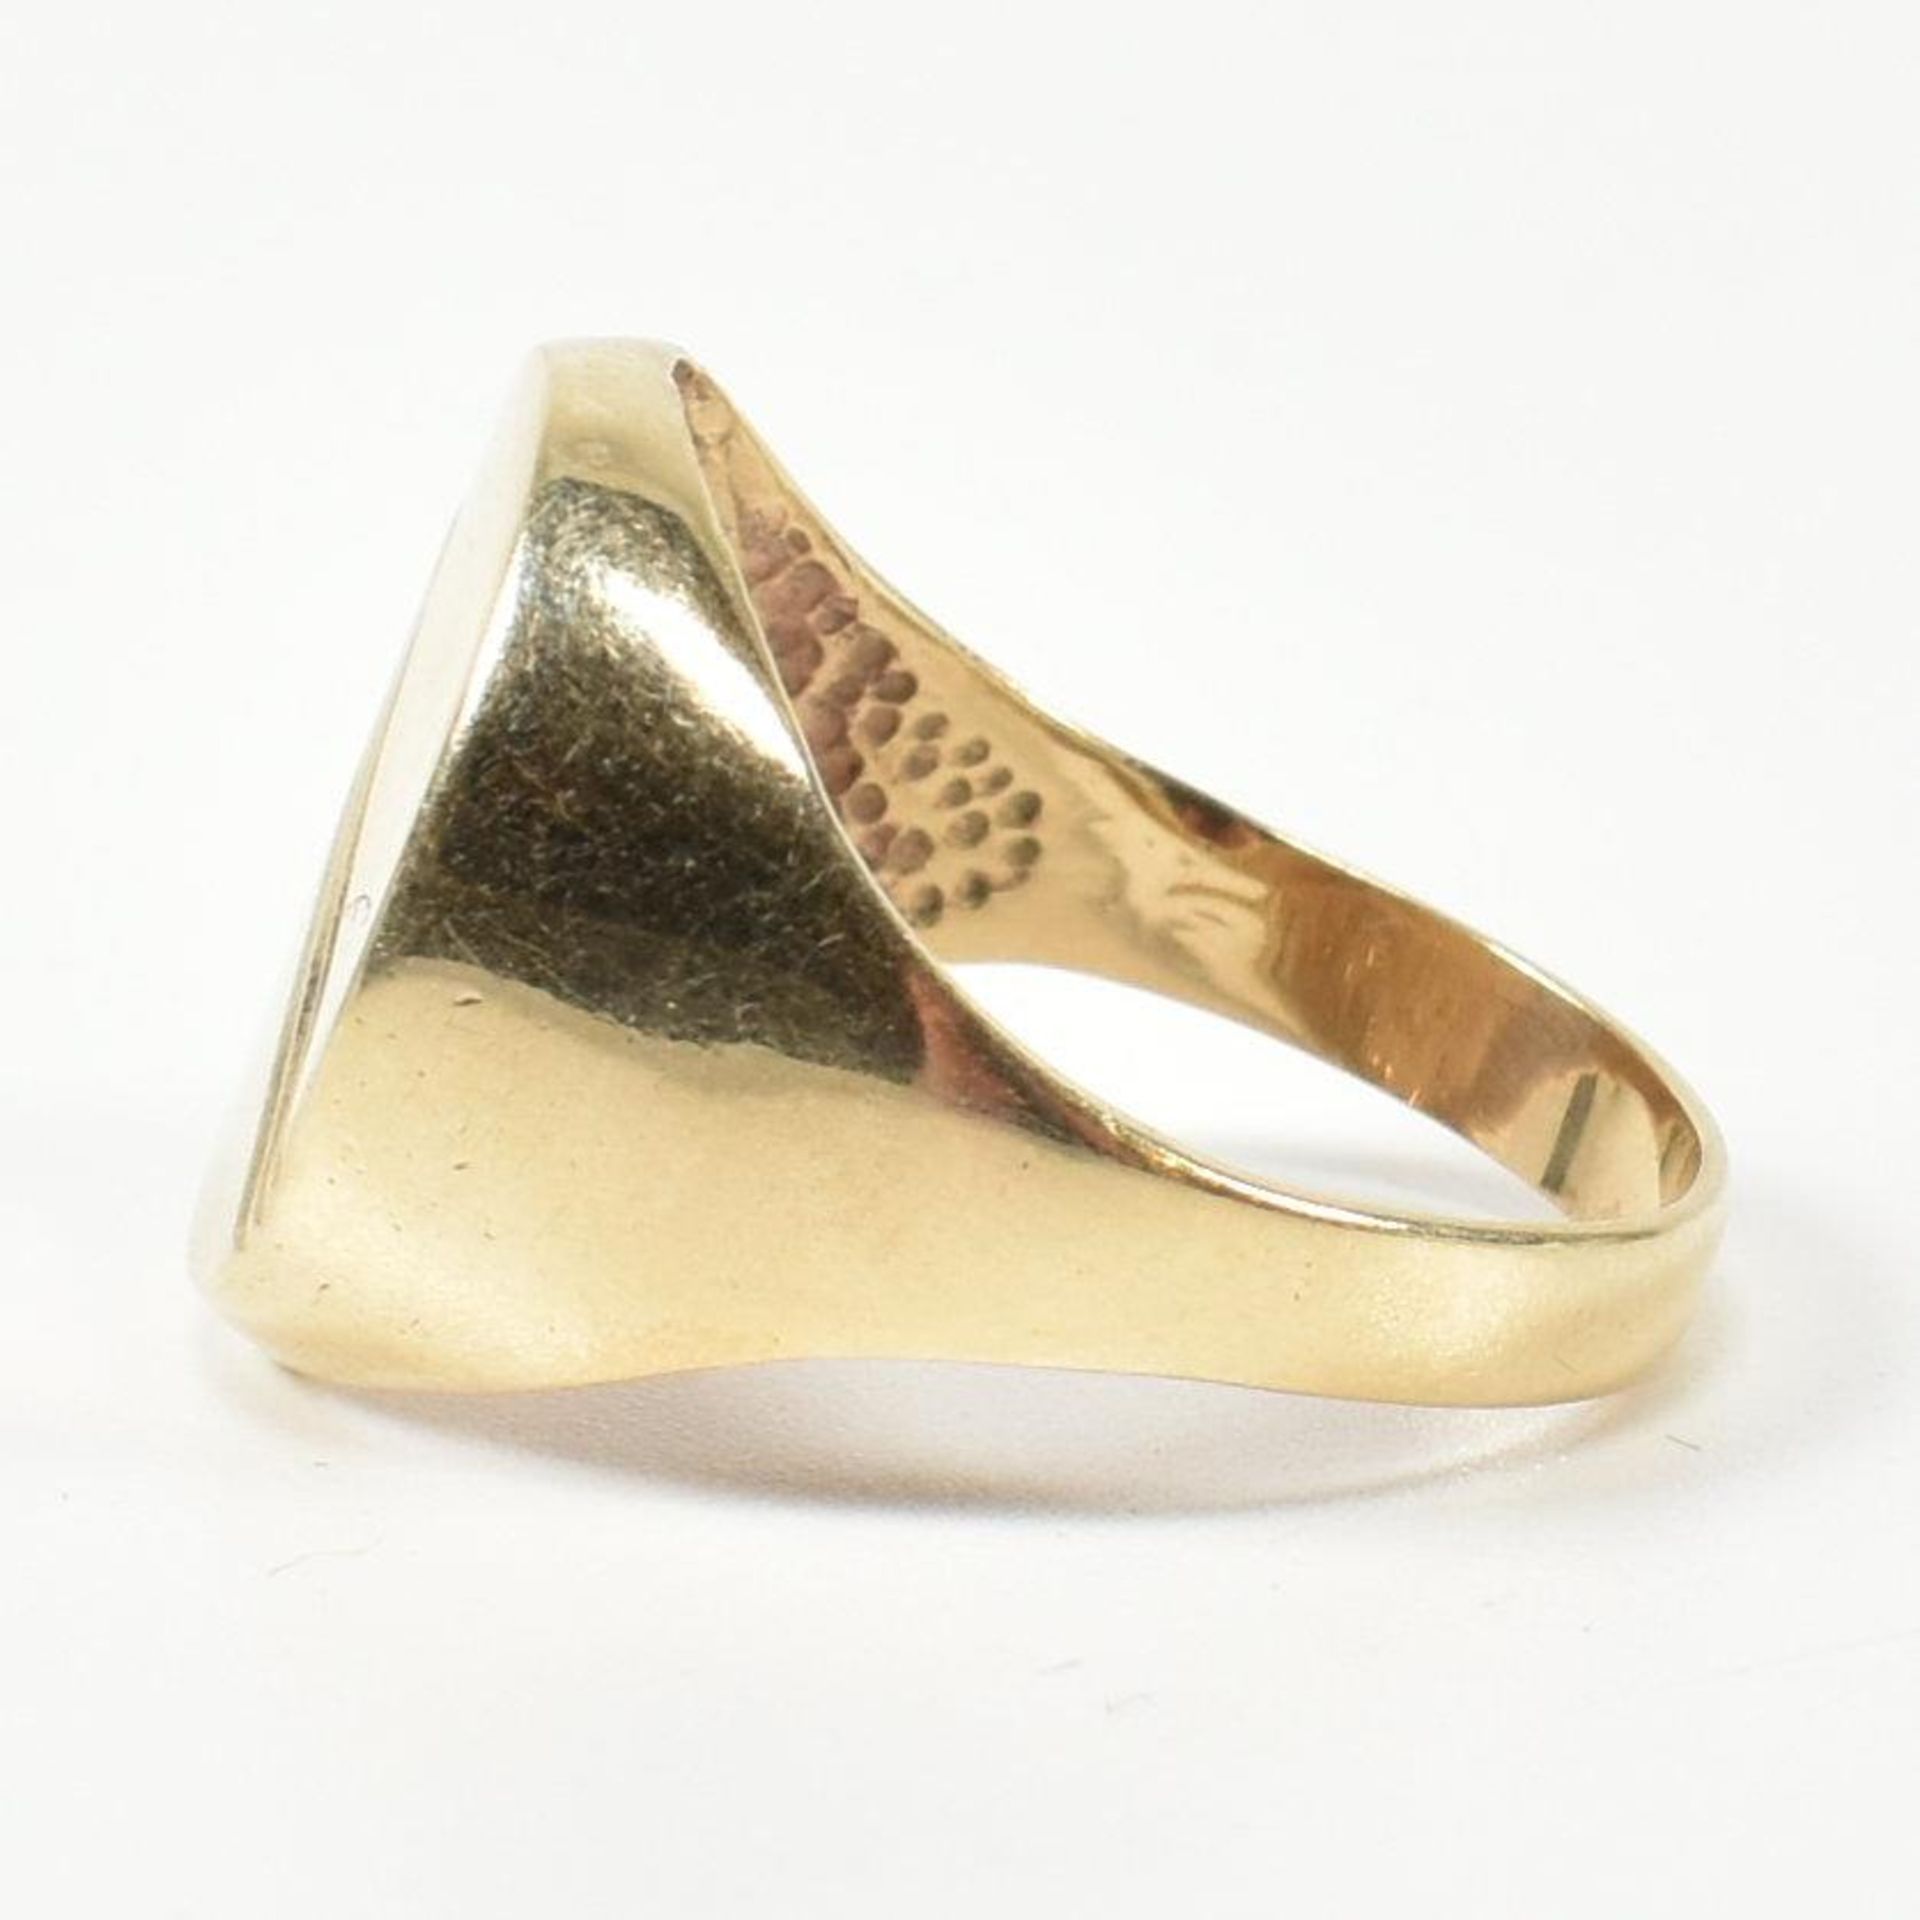 9CT GOLD OVAL SIGNET RING - Image 3 of 6